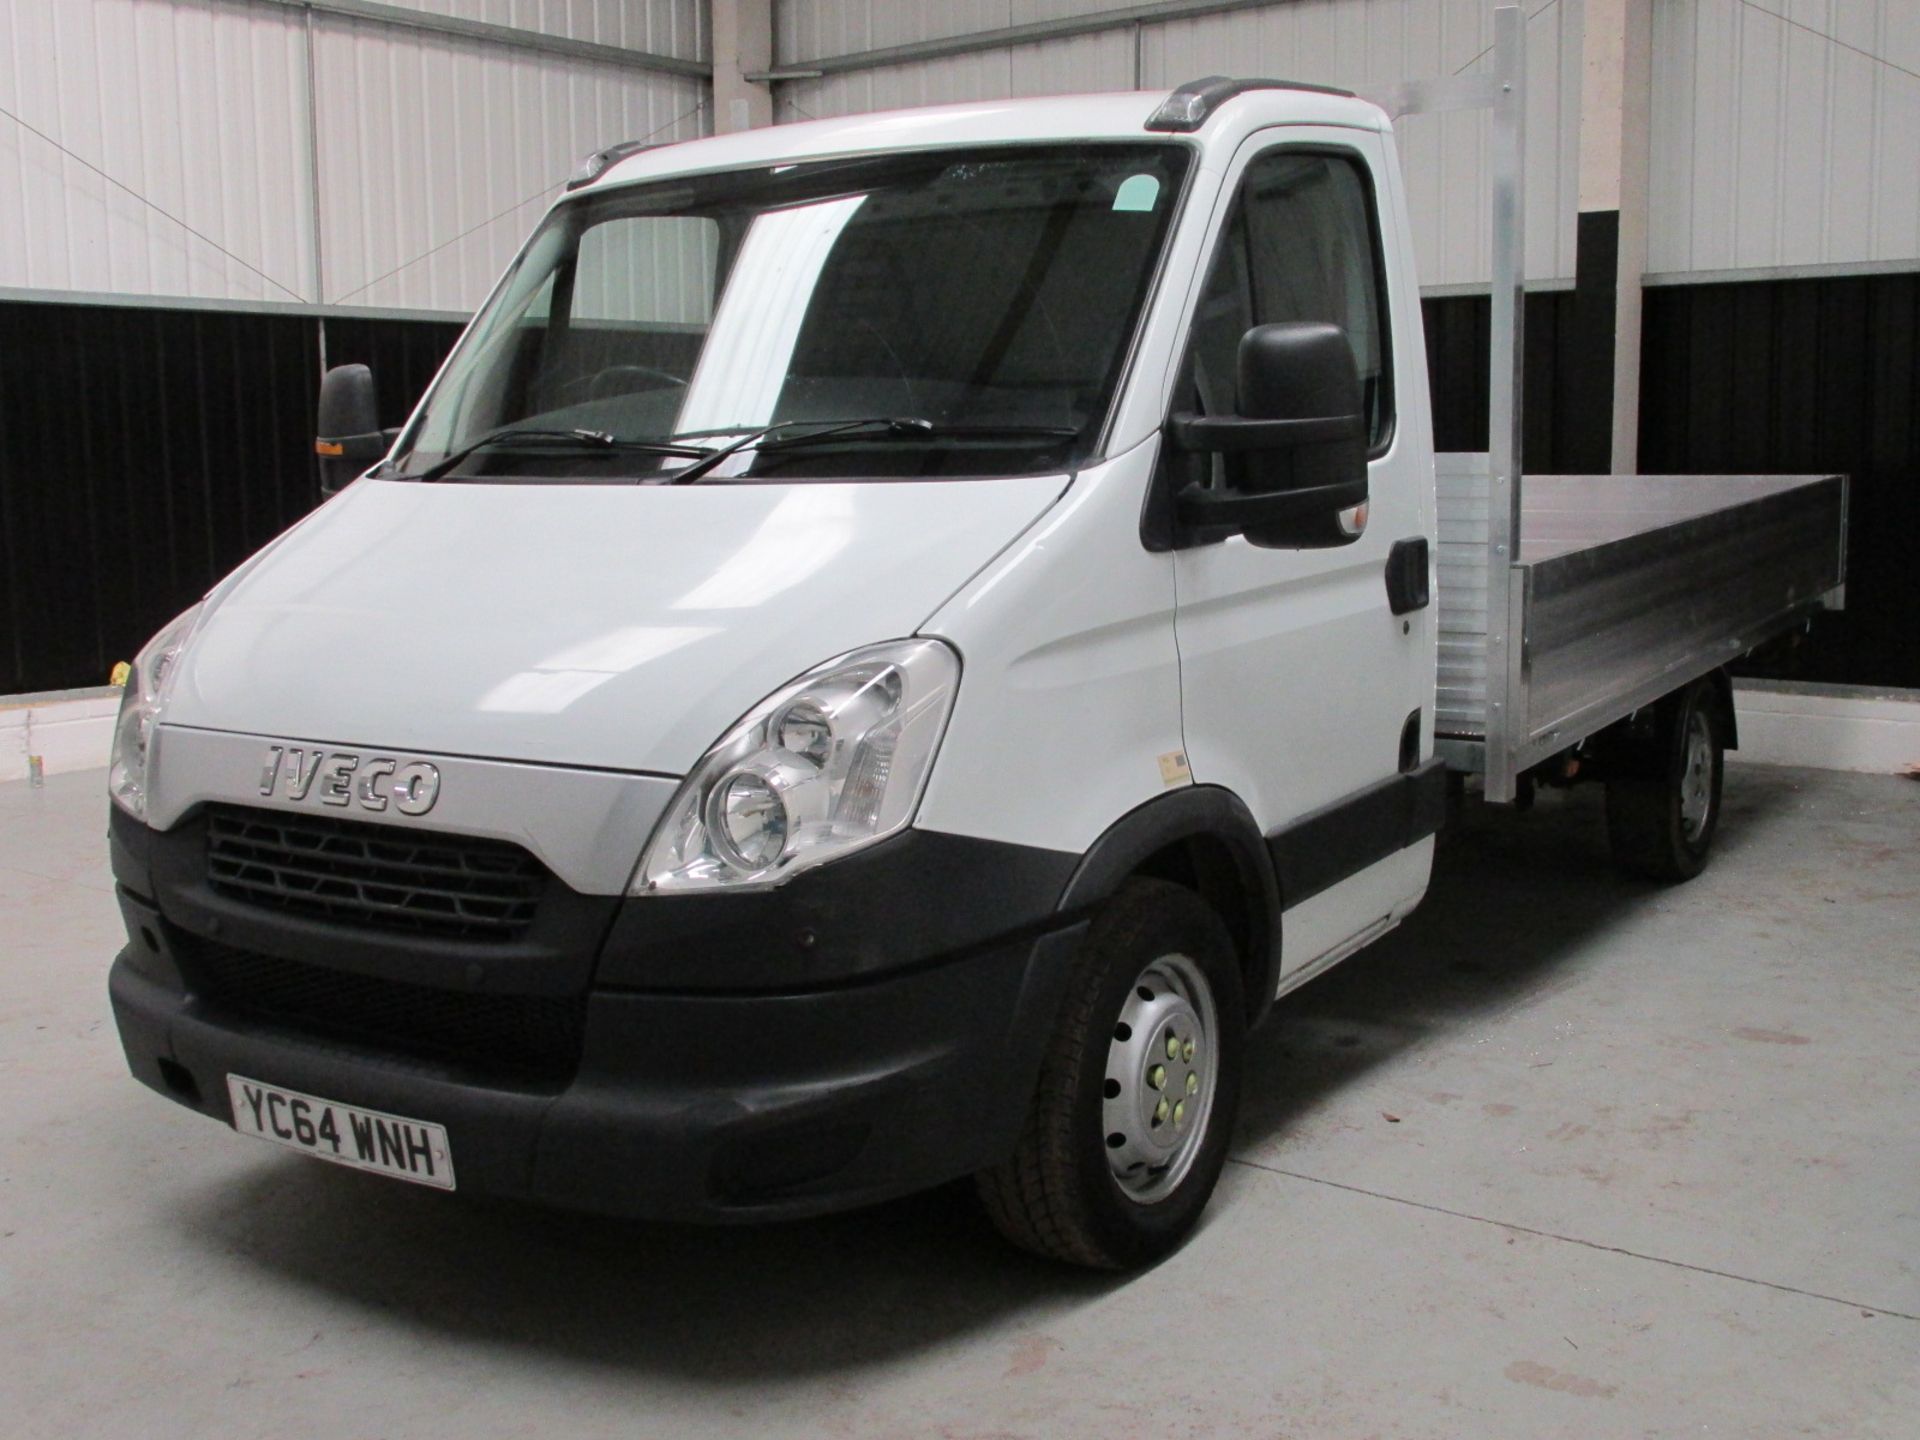 2014 Iveco Daily 35S11 3750 WB 2.4 HPi - Image 11 of 17